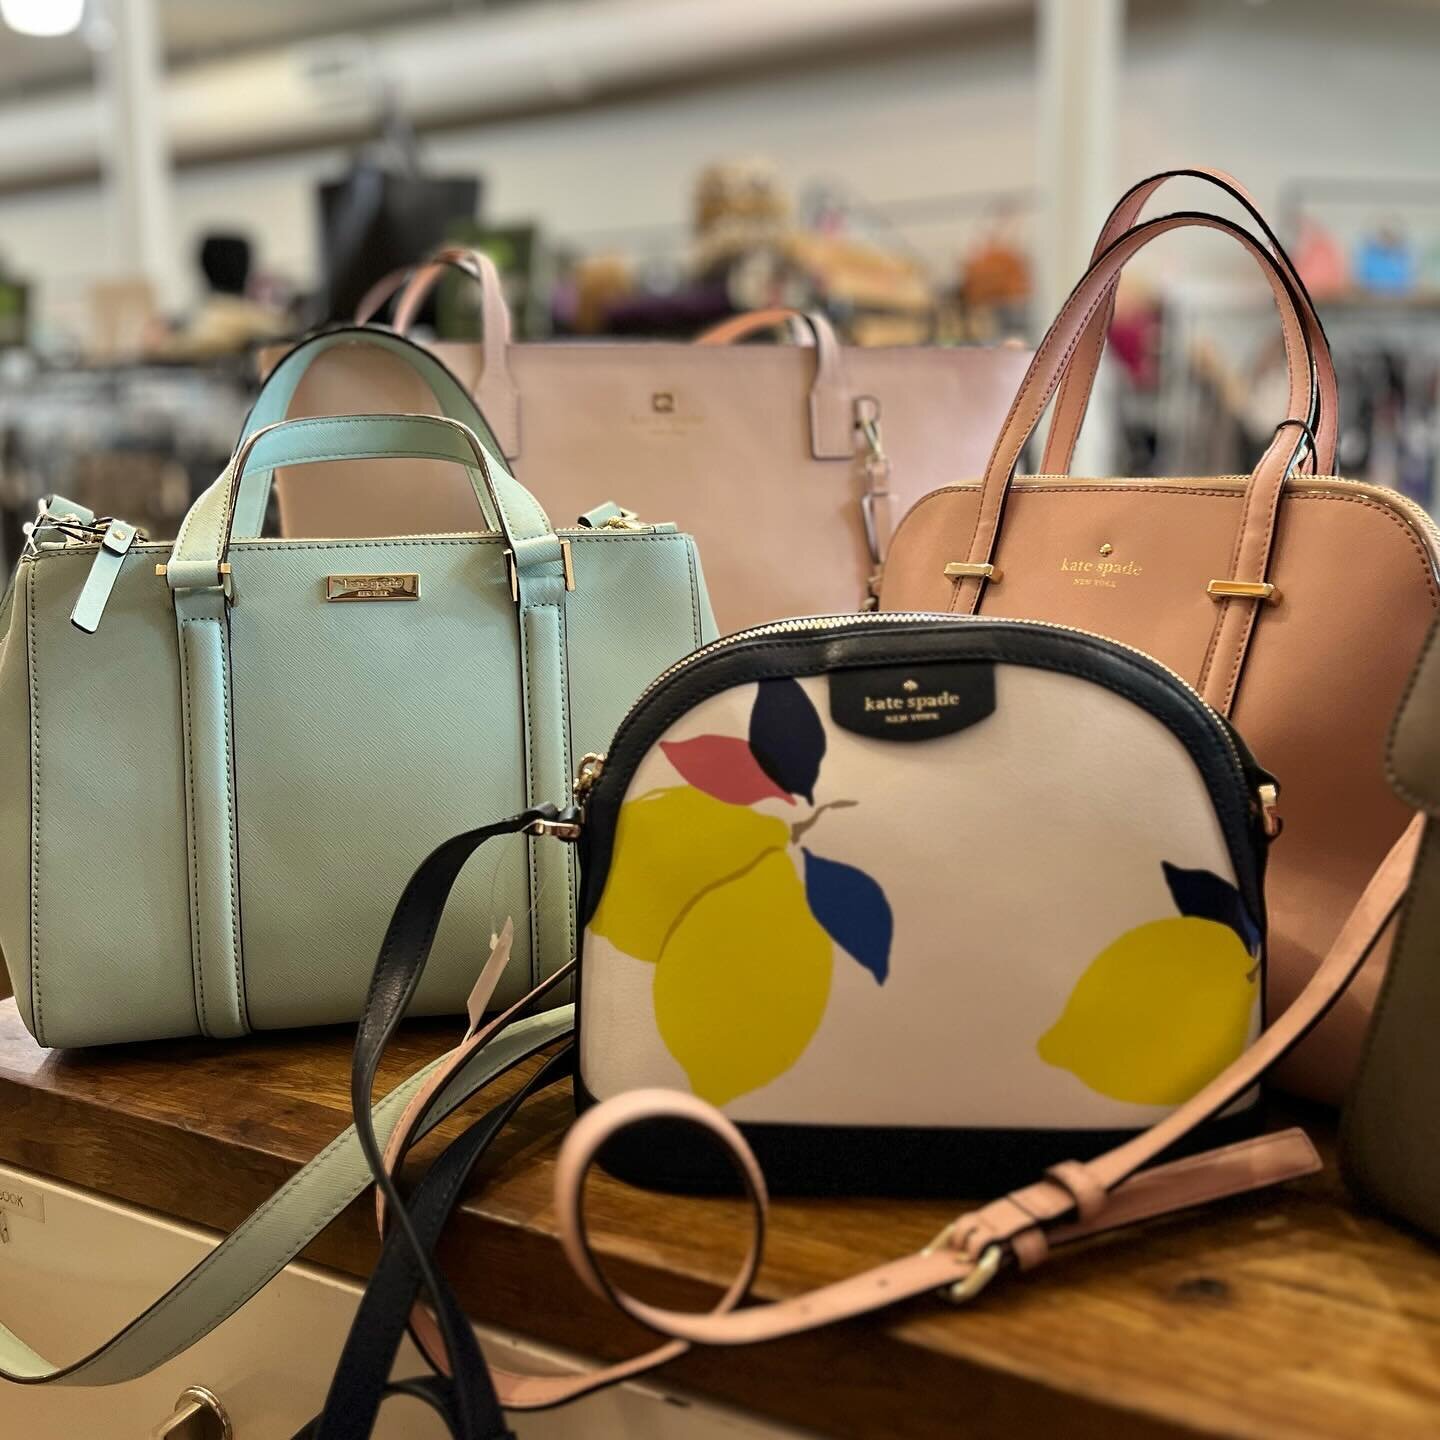 ✨she tucked her coral lipstick away and floated back to the party✨

Step into our &spades;️ suite, only at Greene Street. 

Sky blue convertible xbody: $82.95

Pink convertible half moon xbody tote: $66.95

Lemon print half moon xbody: $130.95

Pink 